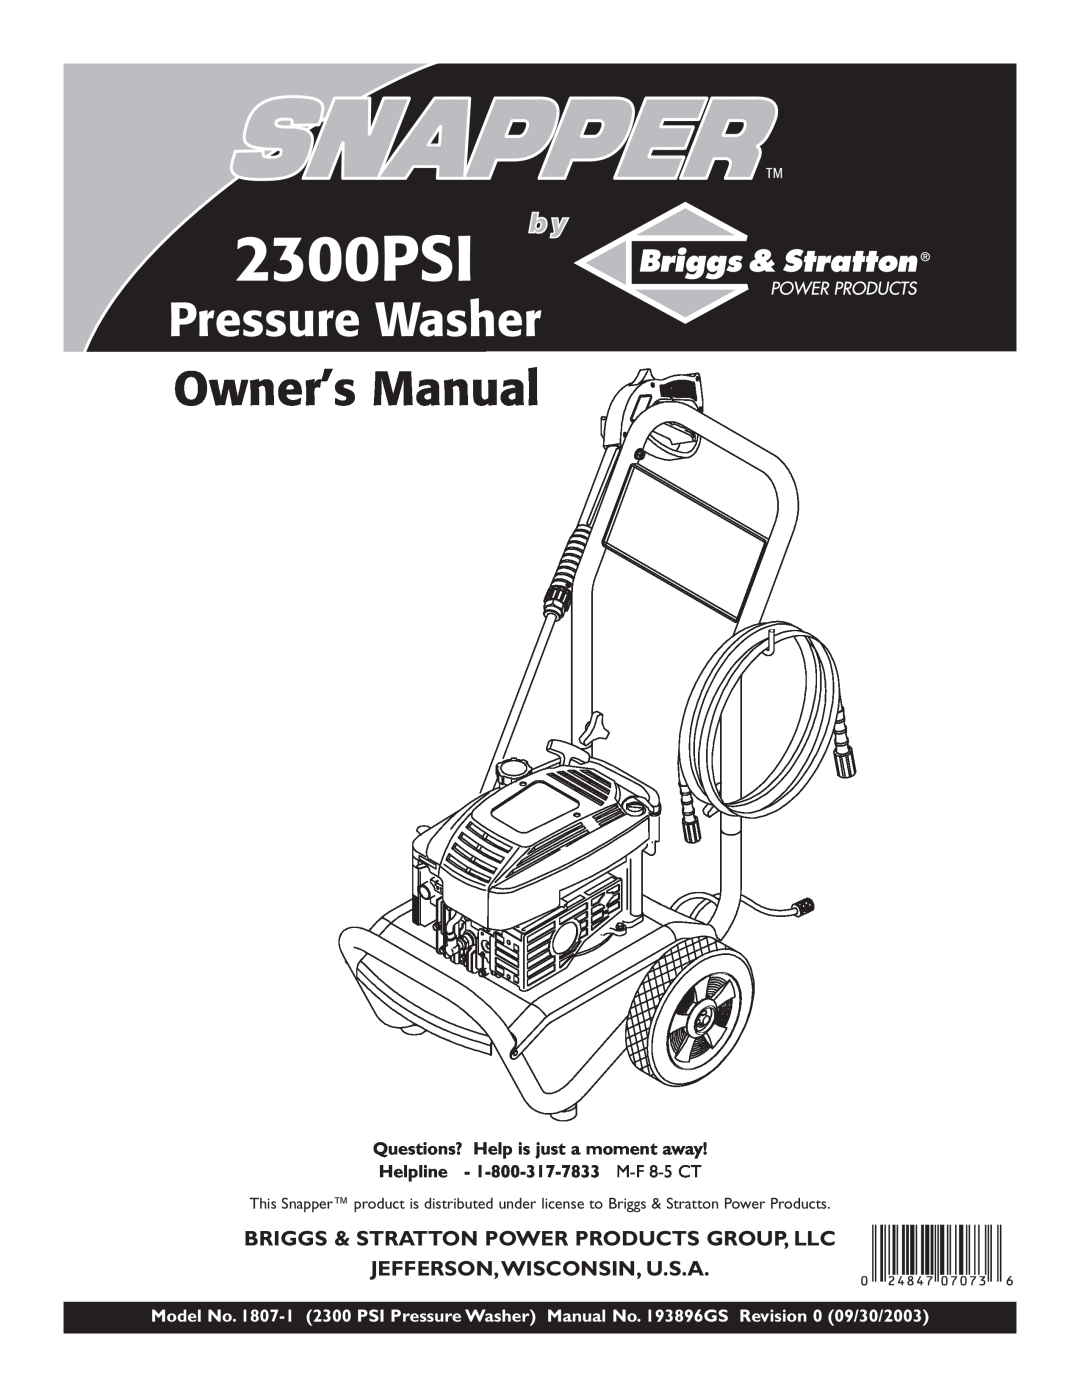 Snapper 1807-1 owner manual Briggs & Stratton Power Products Group, Llc, Jefferson,Wisconsin, U.S.A, 2300PSI 